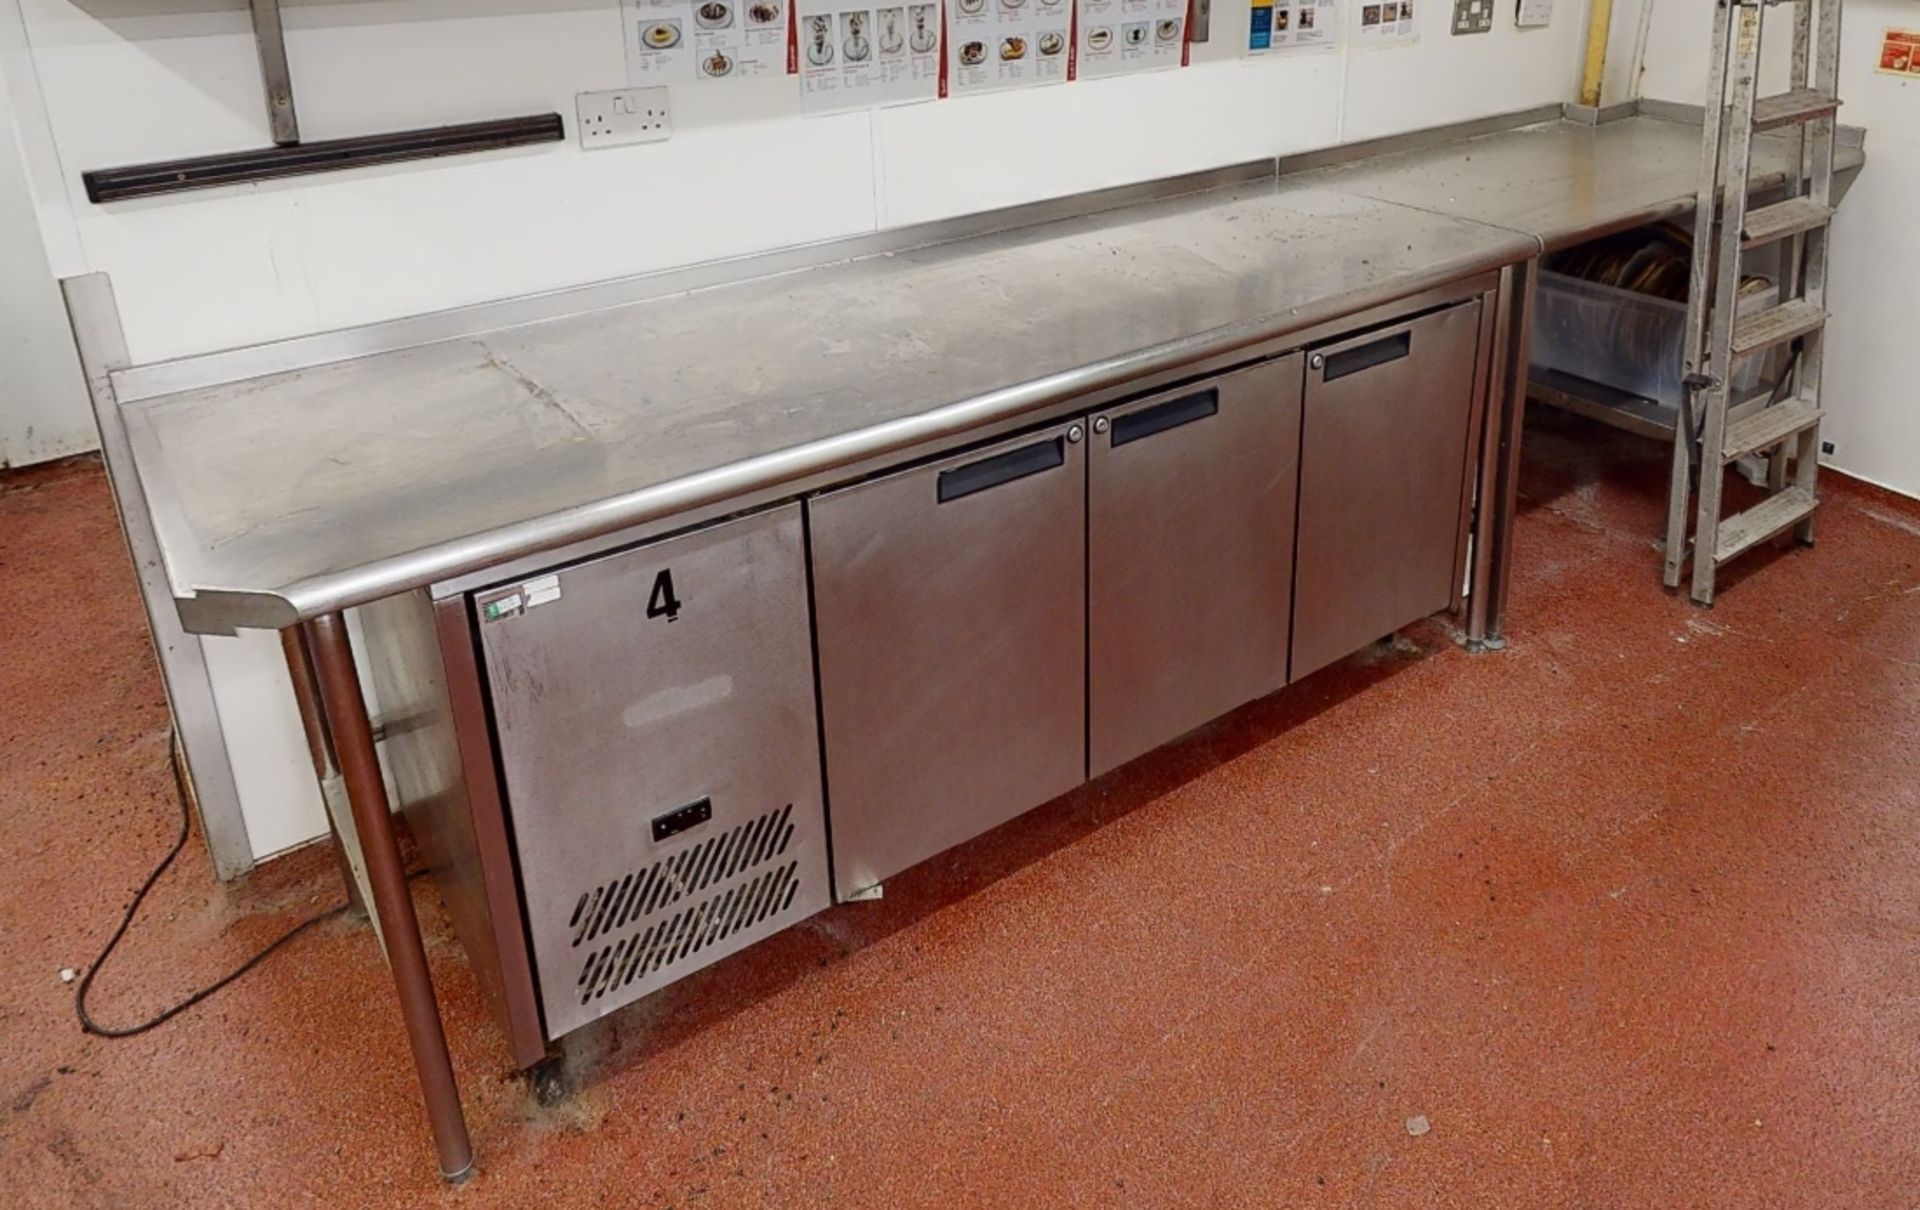 2 x Stainless Steel Prep Bench With Upstands And Corner Cut-out - From a Popular American Diner - Image 2 of 2